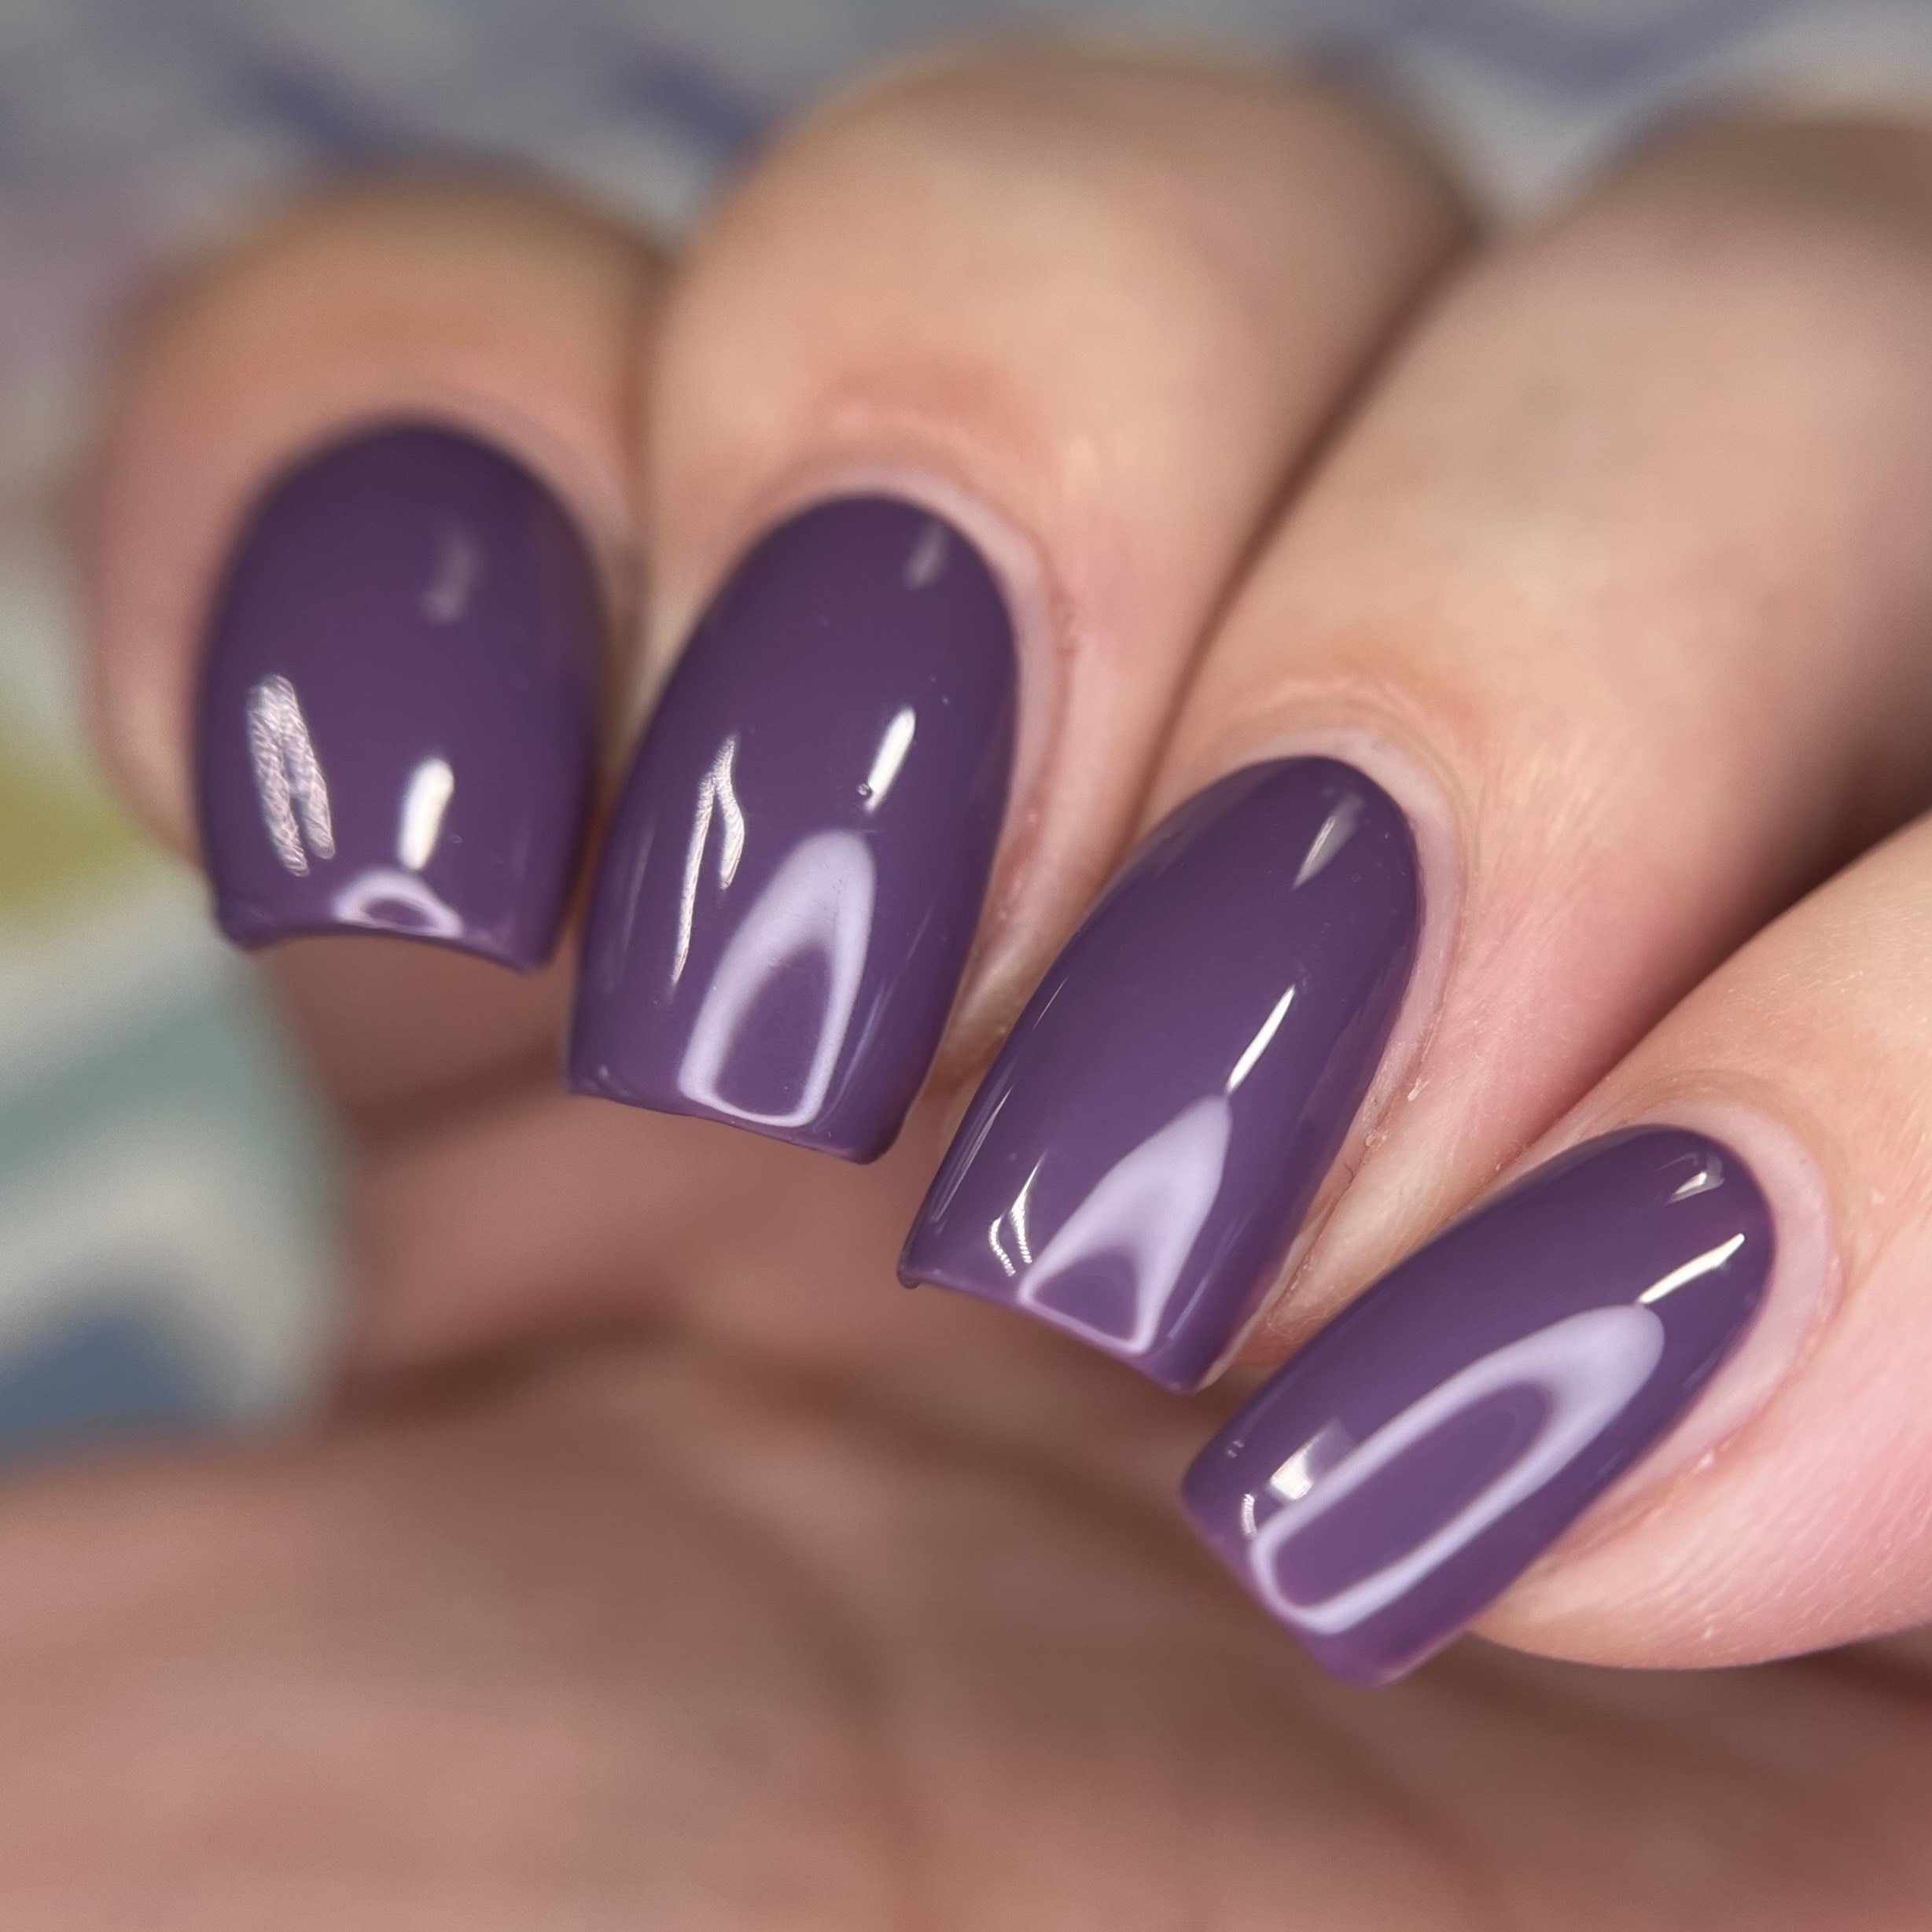 Remedy Nails - PLUCKY Plum